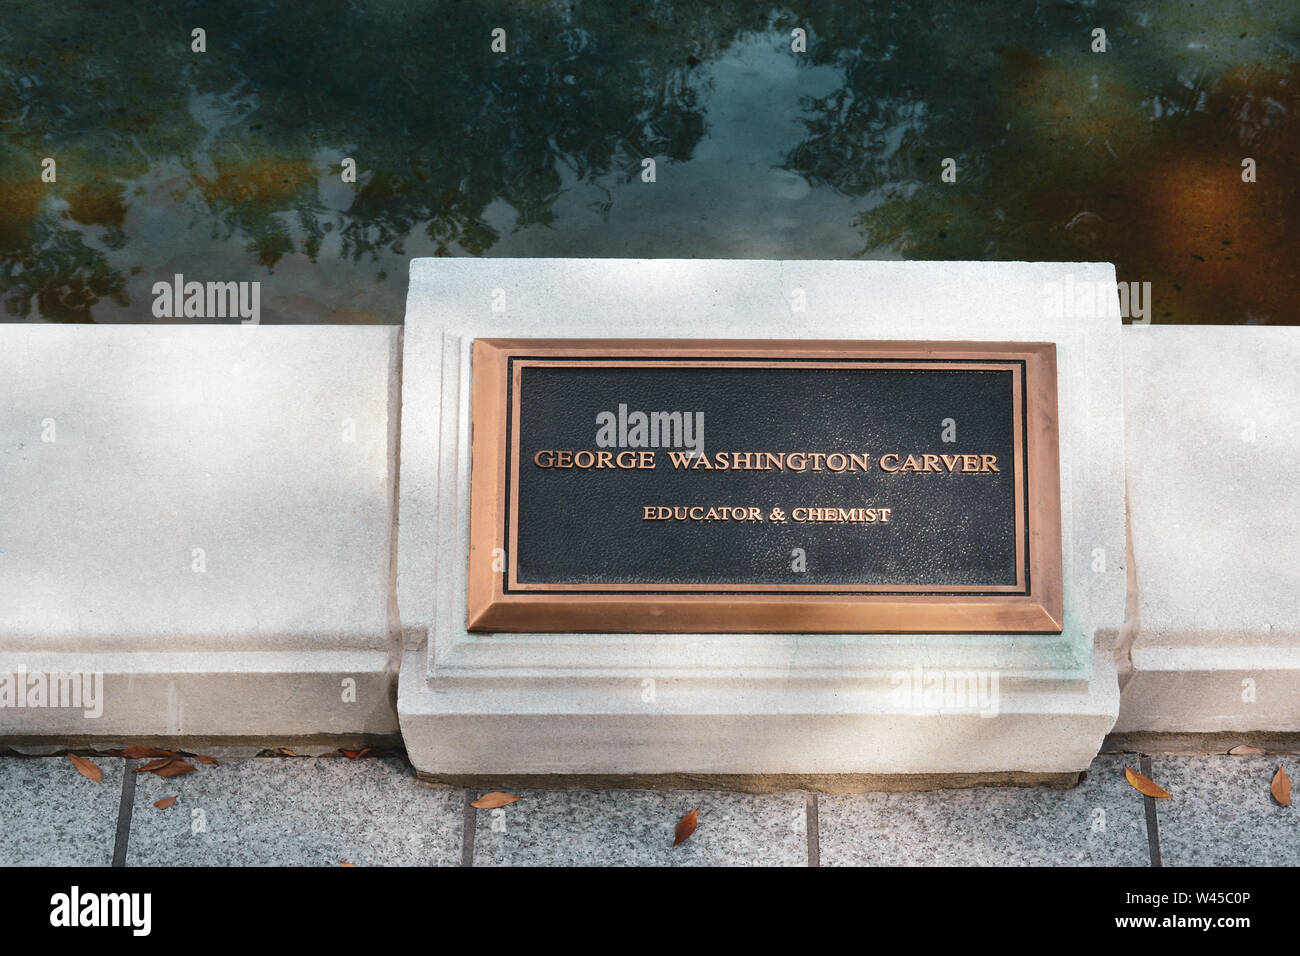 A bronze plaque commenorating George Washington Carver, Educator & Chemist, on the reflecting pool border on the RSA Tower Complex in Montgomery, AL, Stock Photo